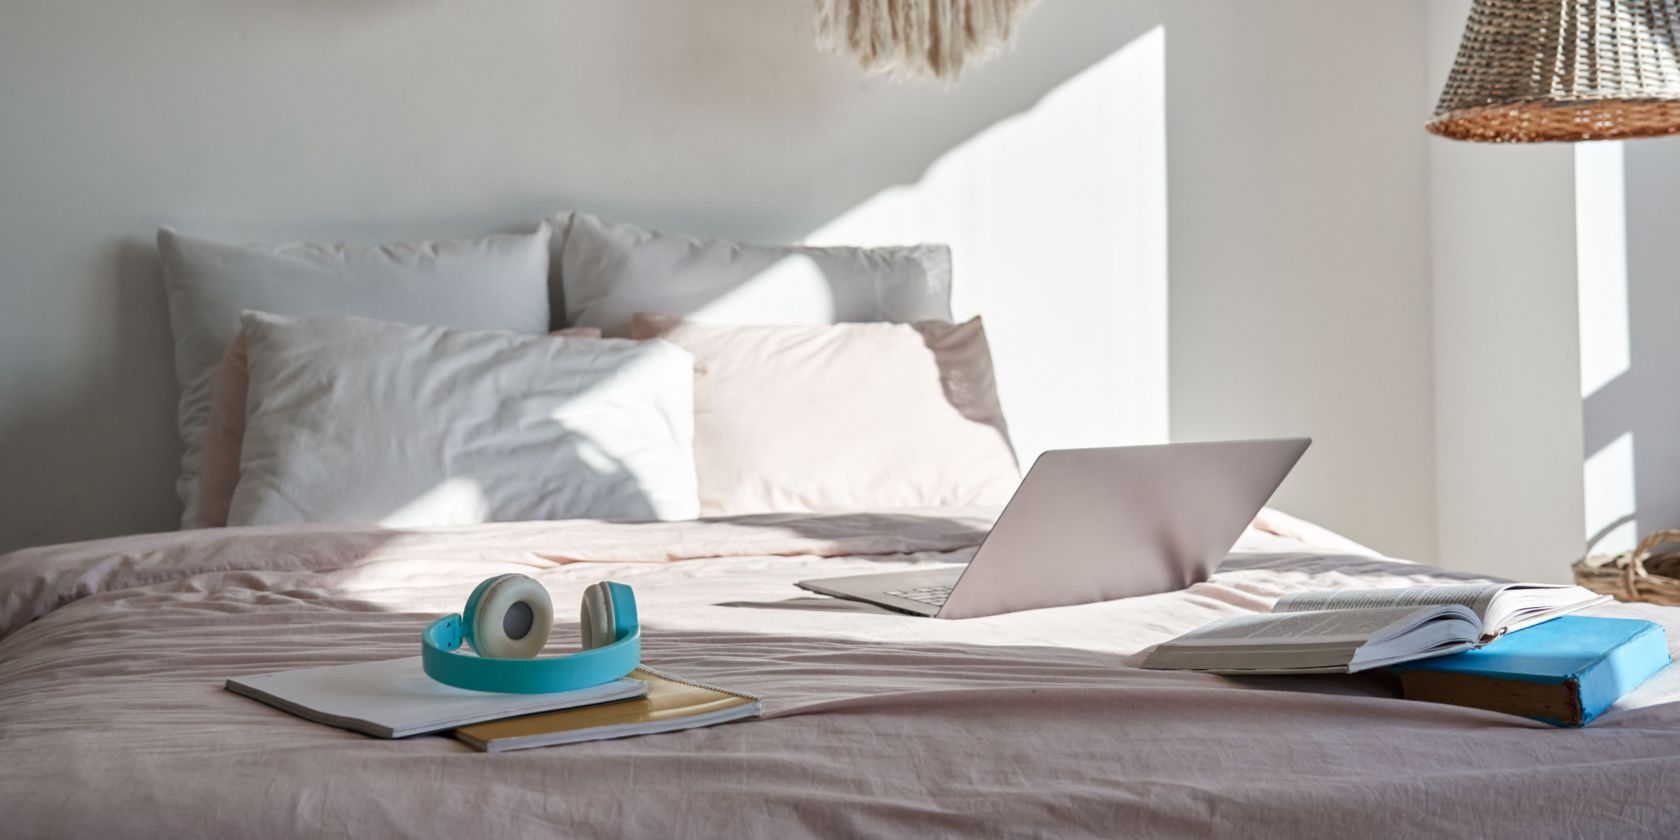 Laptop on Bed with headphones and books